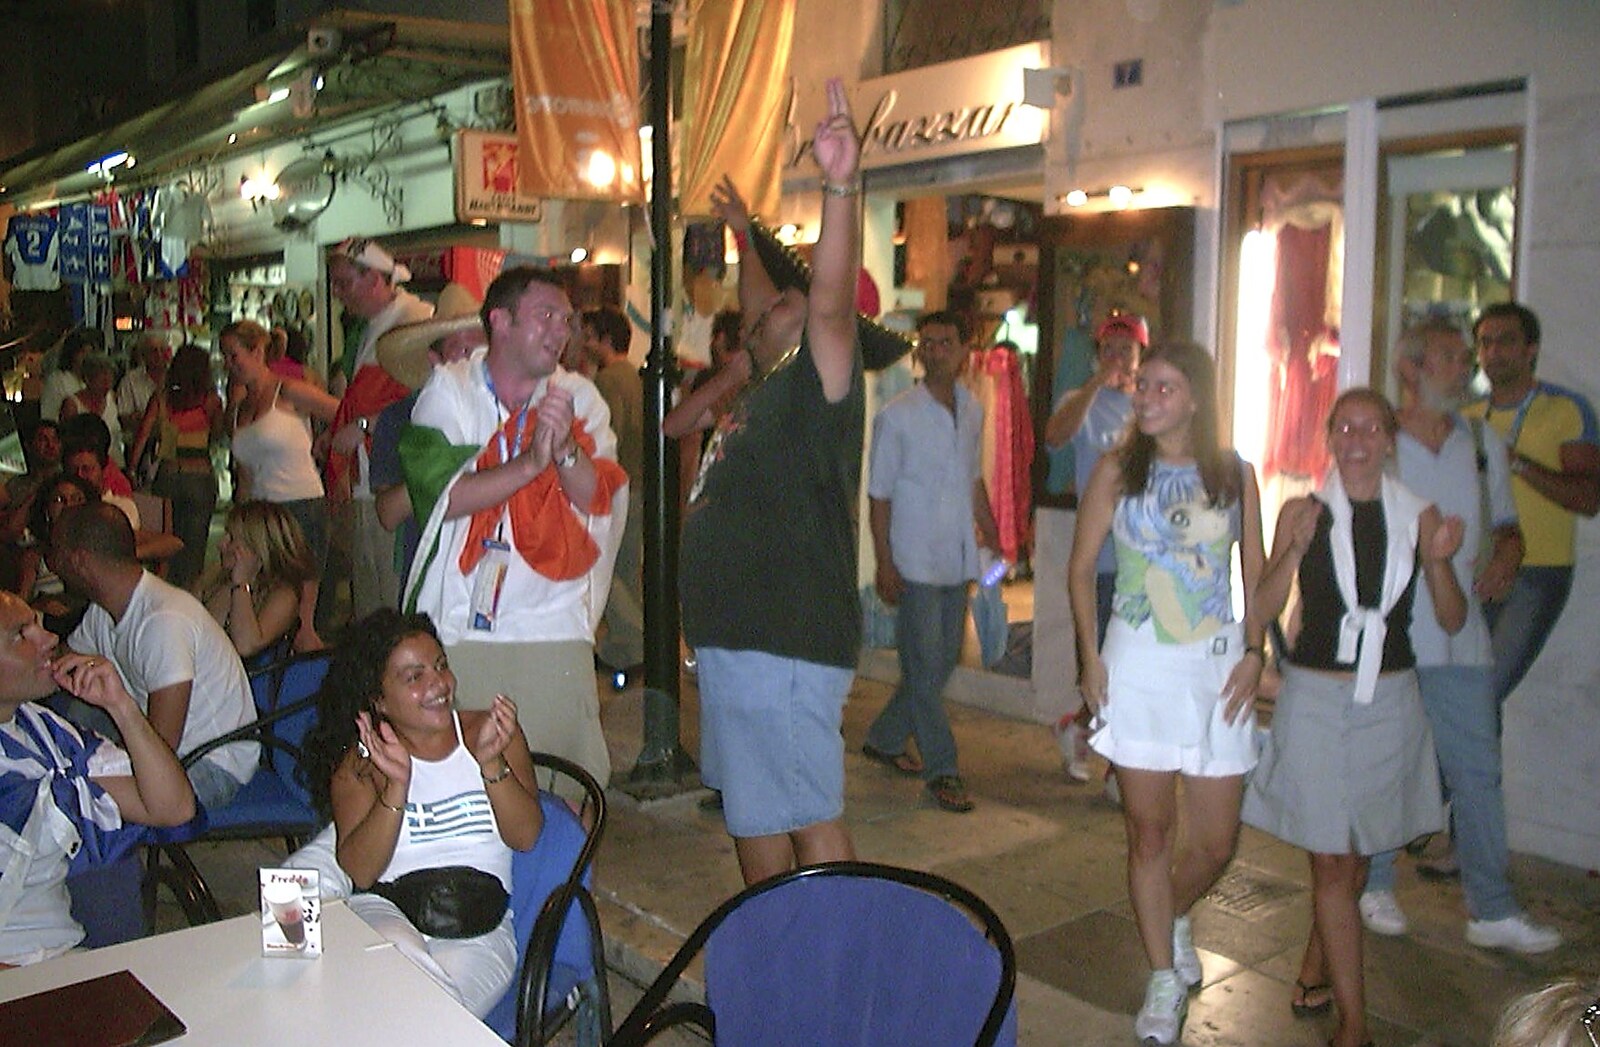 There's all sorts of celebrations going on from A Postcard From Athens: A Day Trip to the Olympics, Greece - 19th August 2004